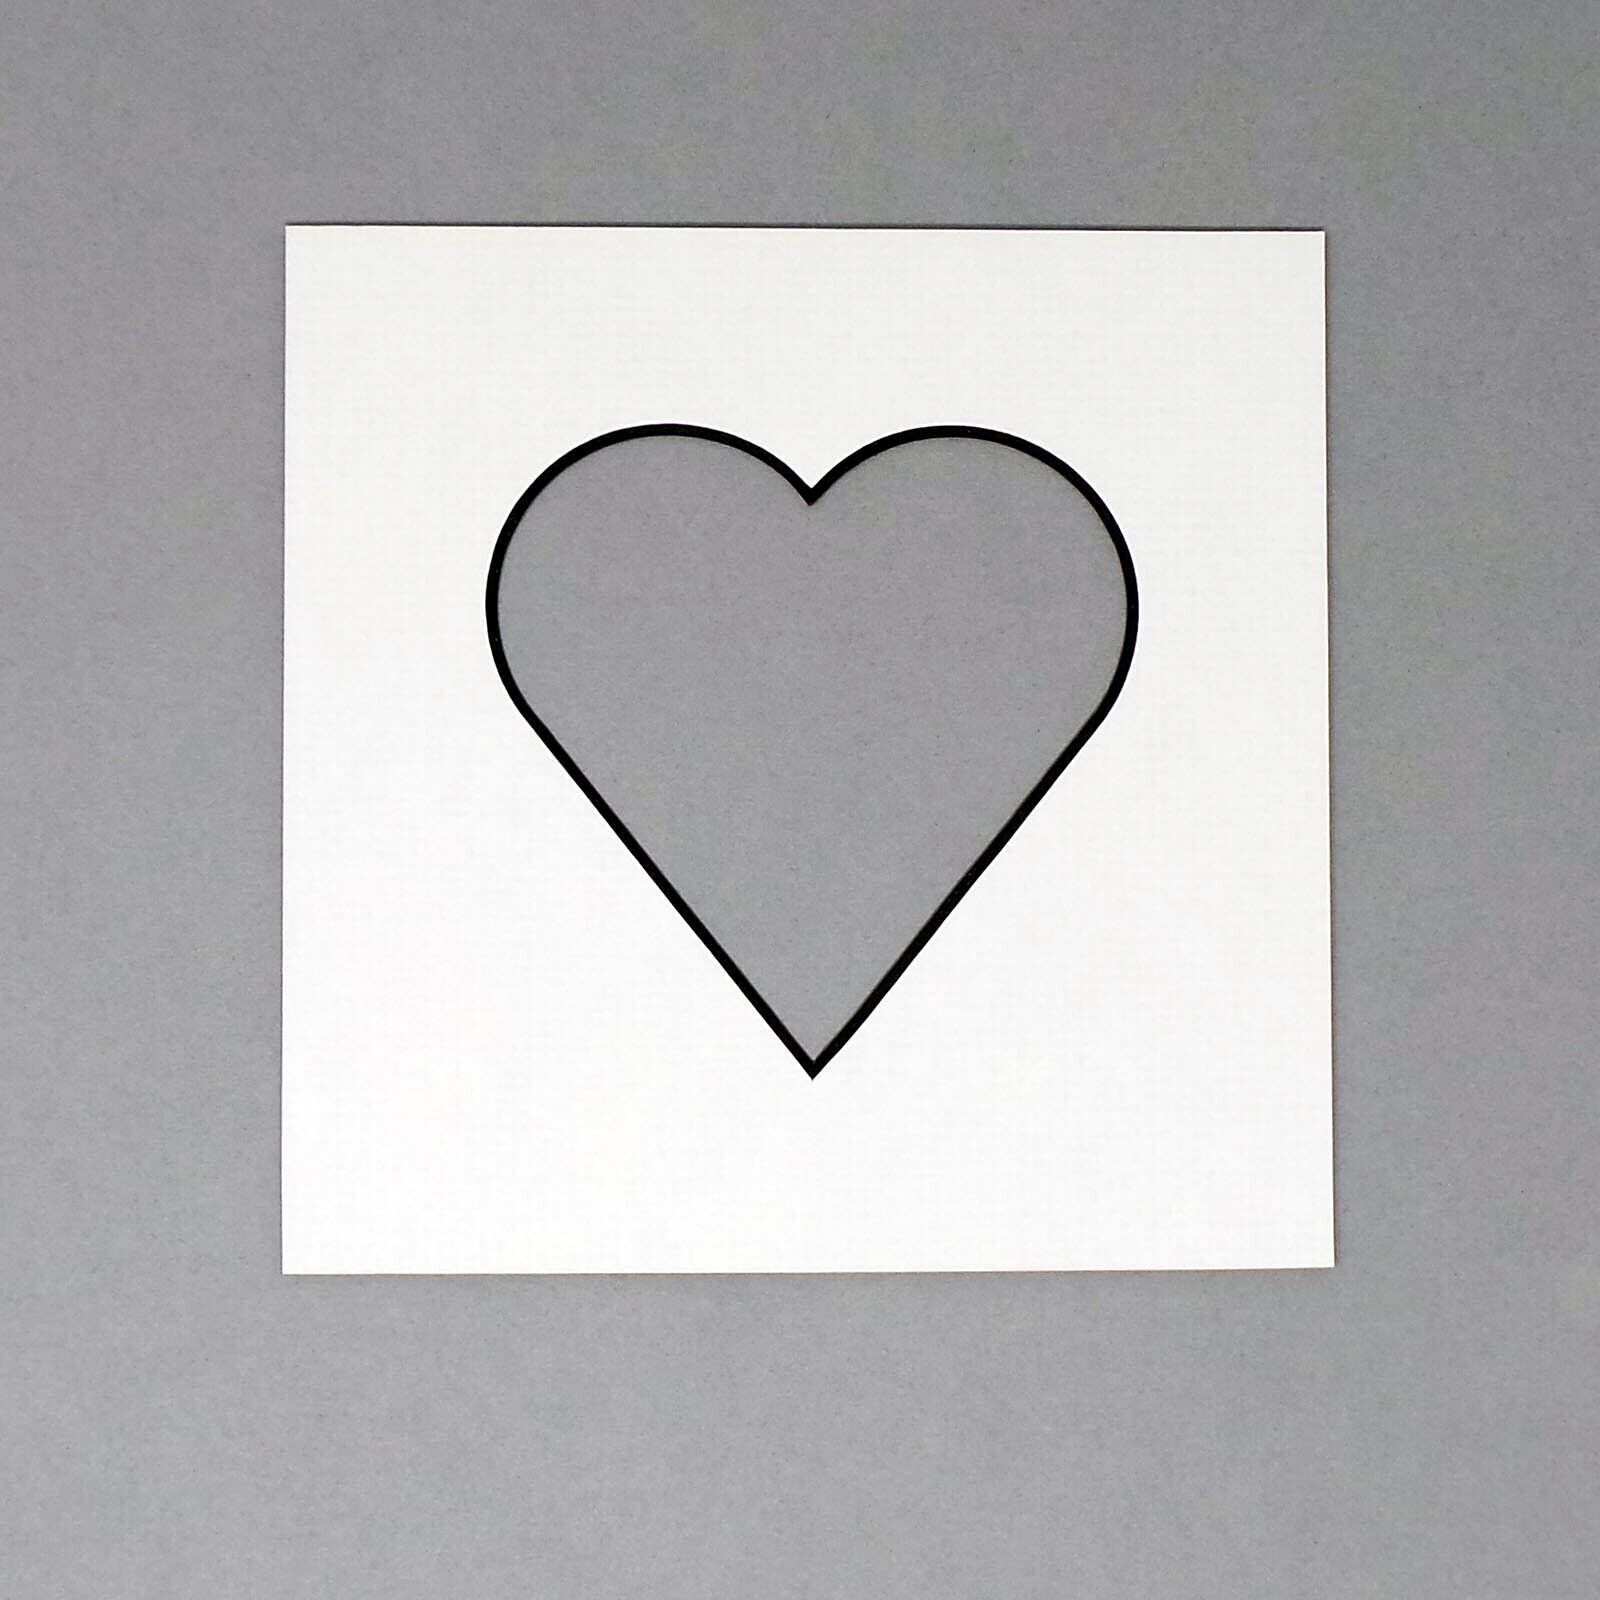 6x6 inch Square Picture Mount with Heart Aperture bevel cut 5x5 inches  P&P